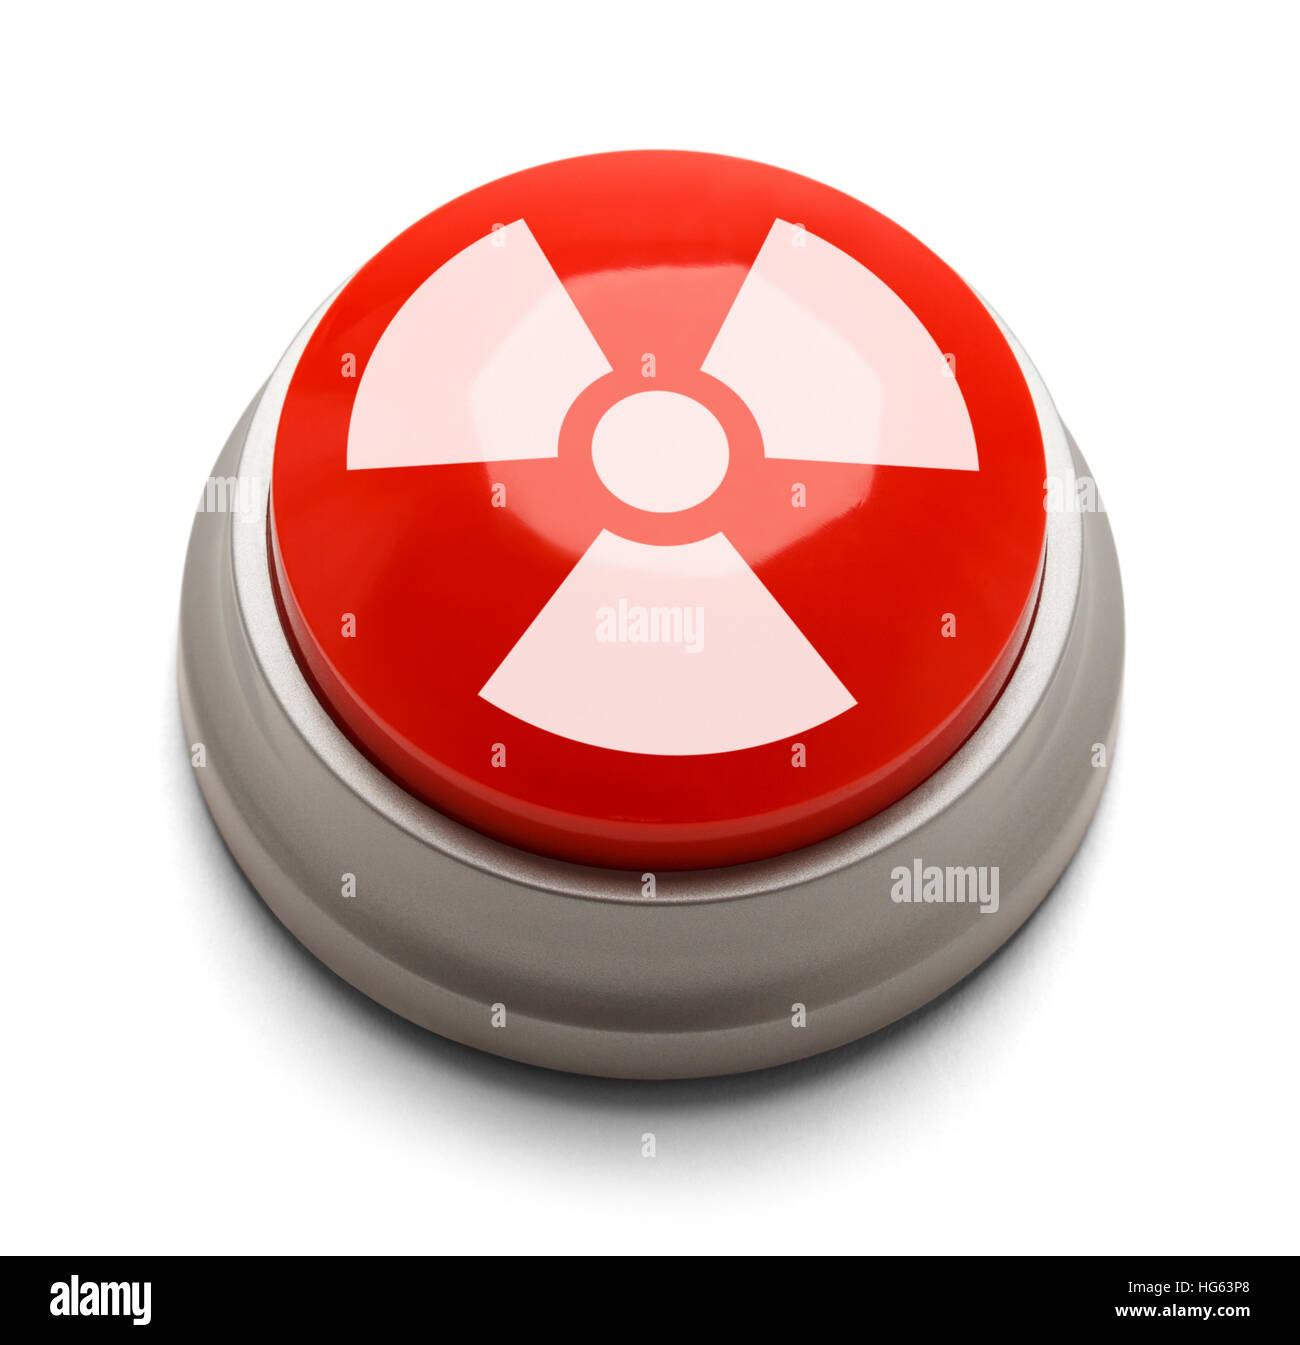 Red and White Nuke Button Isolated on White Background. Stock Photo